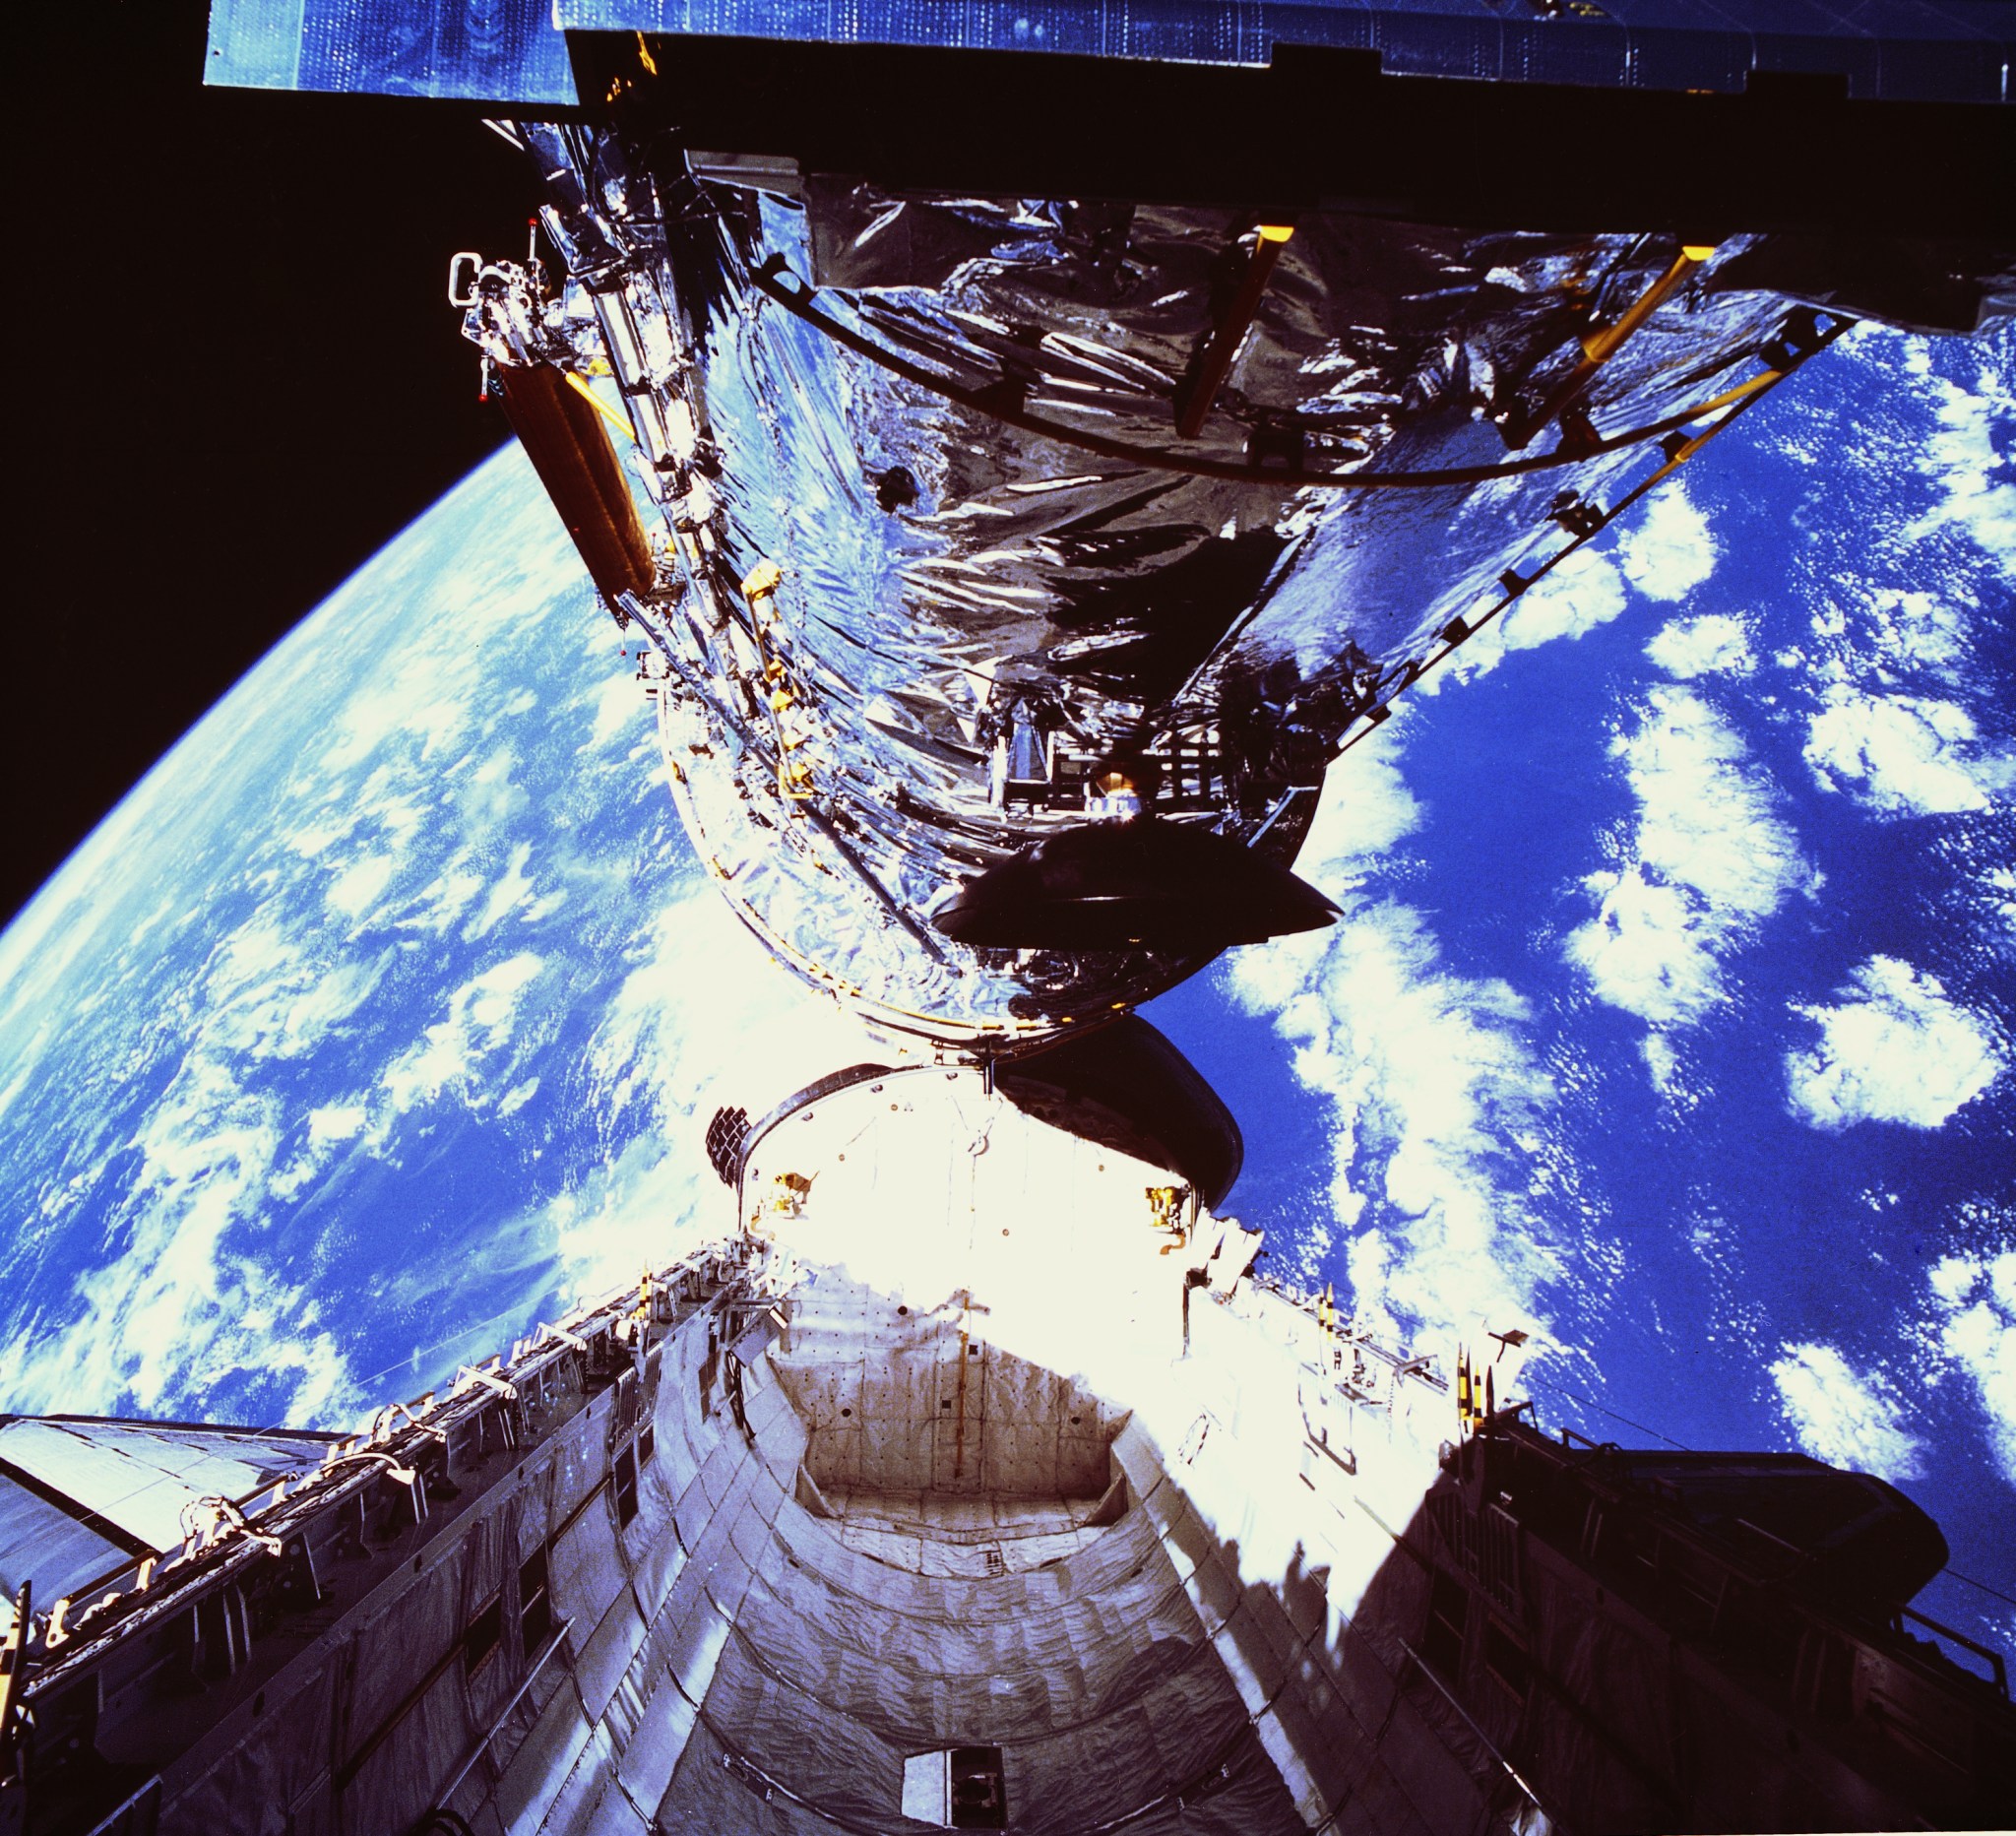 Hubble clears the orbiter’s cargo bay during its deployment on April 25, 1990.